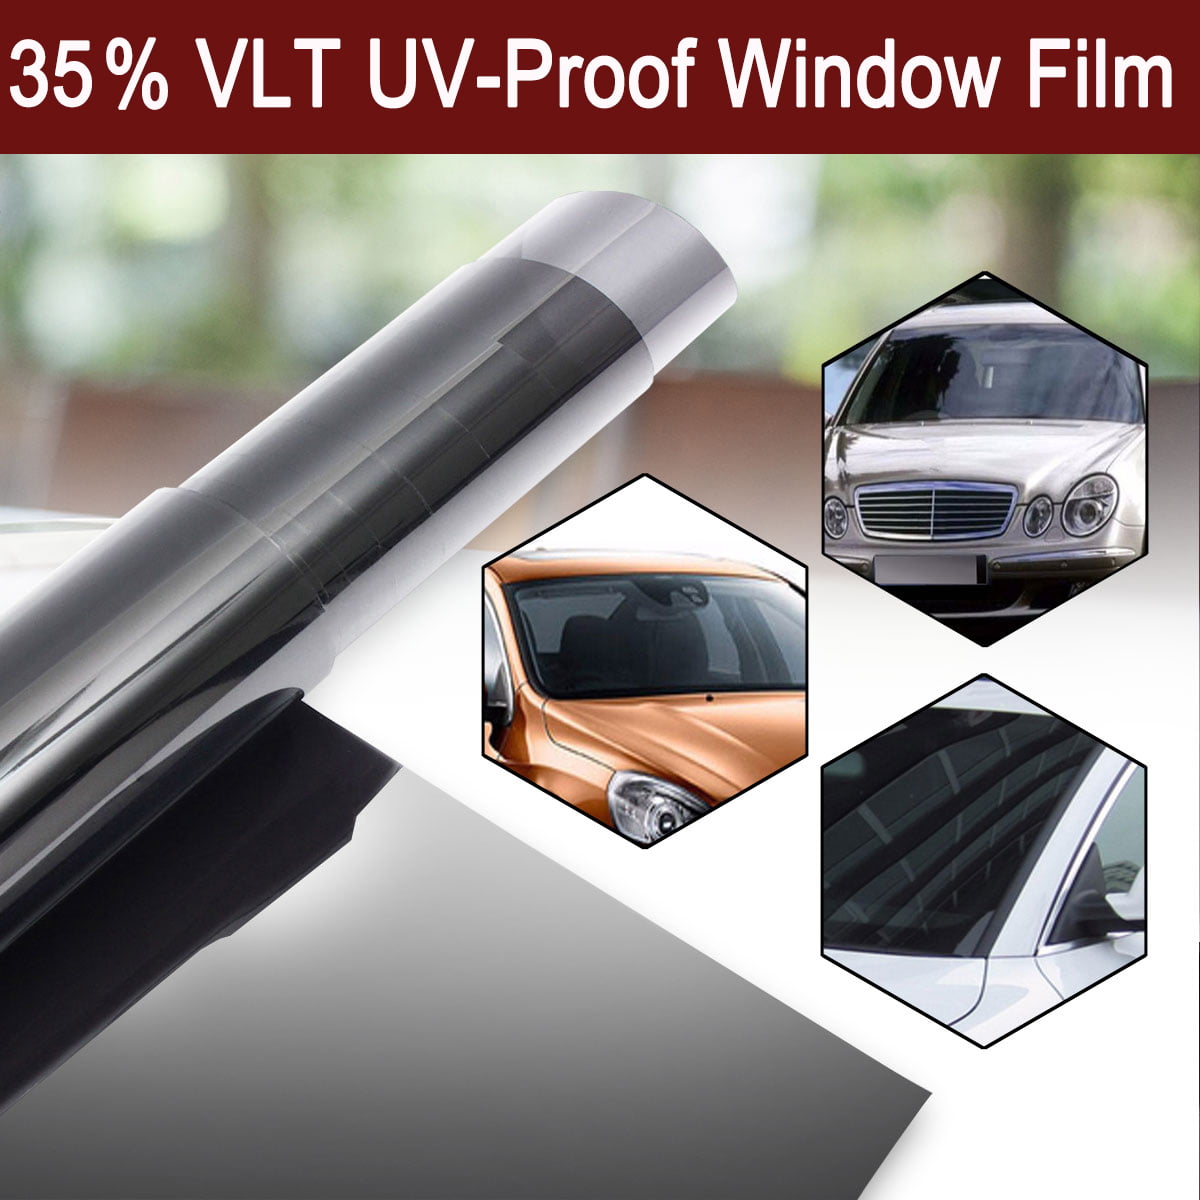 Norld 35% 30 in x 25 Ft DIY Professional Adhesive Window Tint Film Uncut Roll 